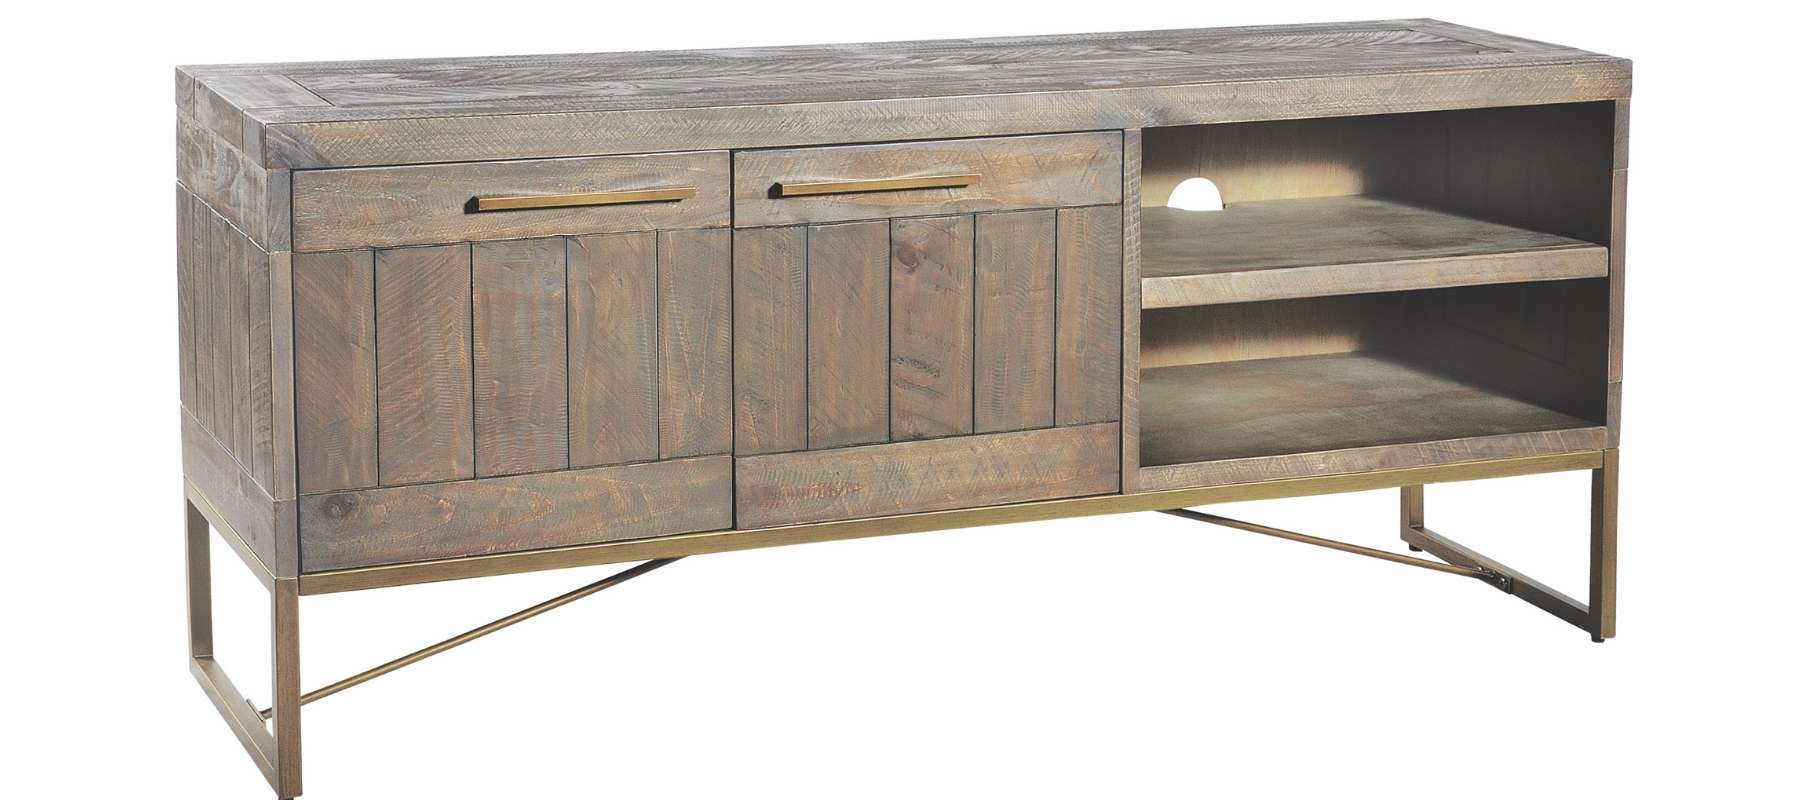 Tavistock Industrial Coffee table with shelves and cupboards